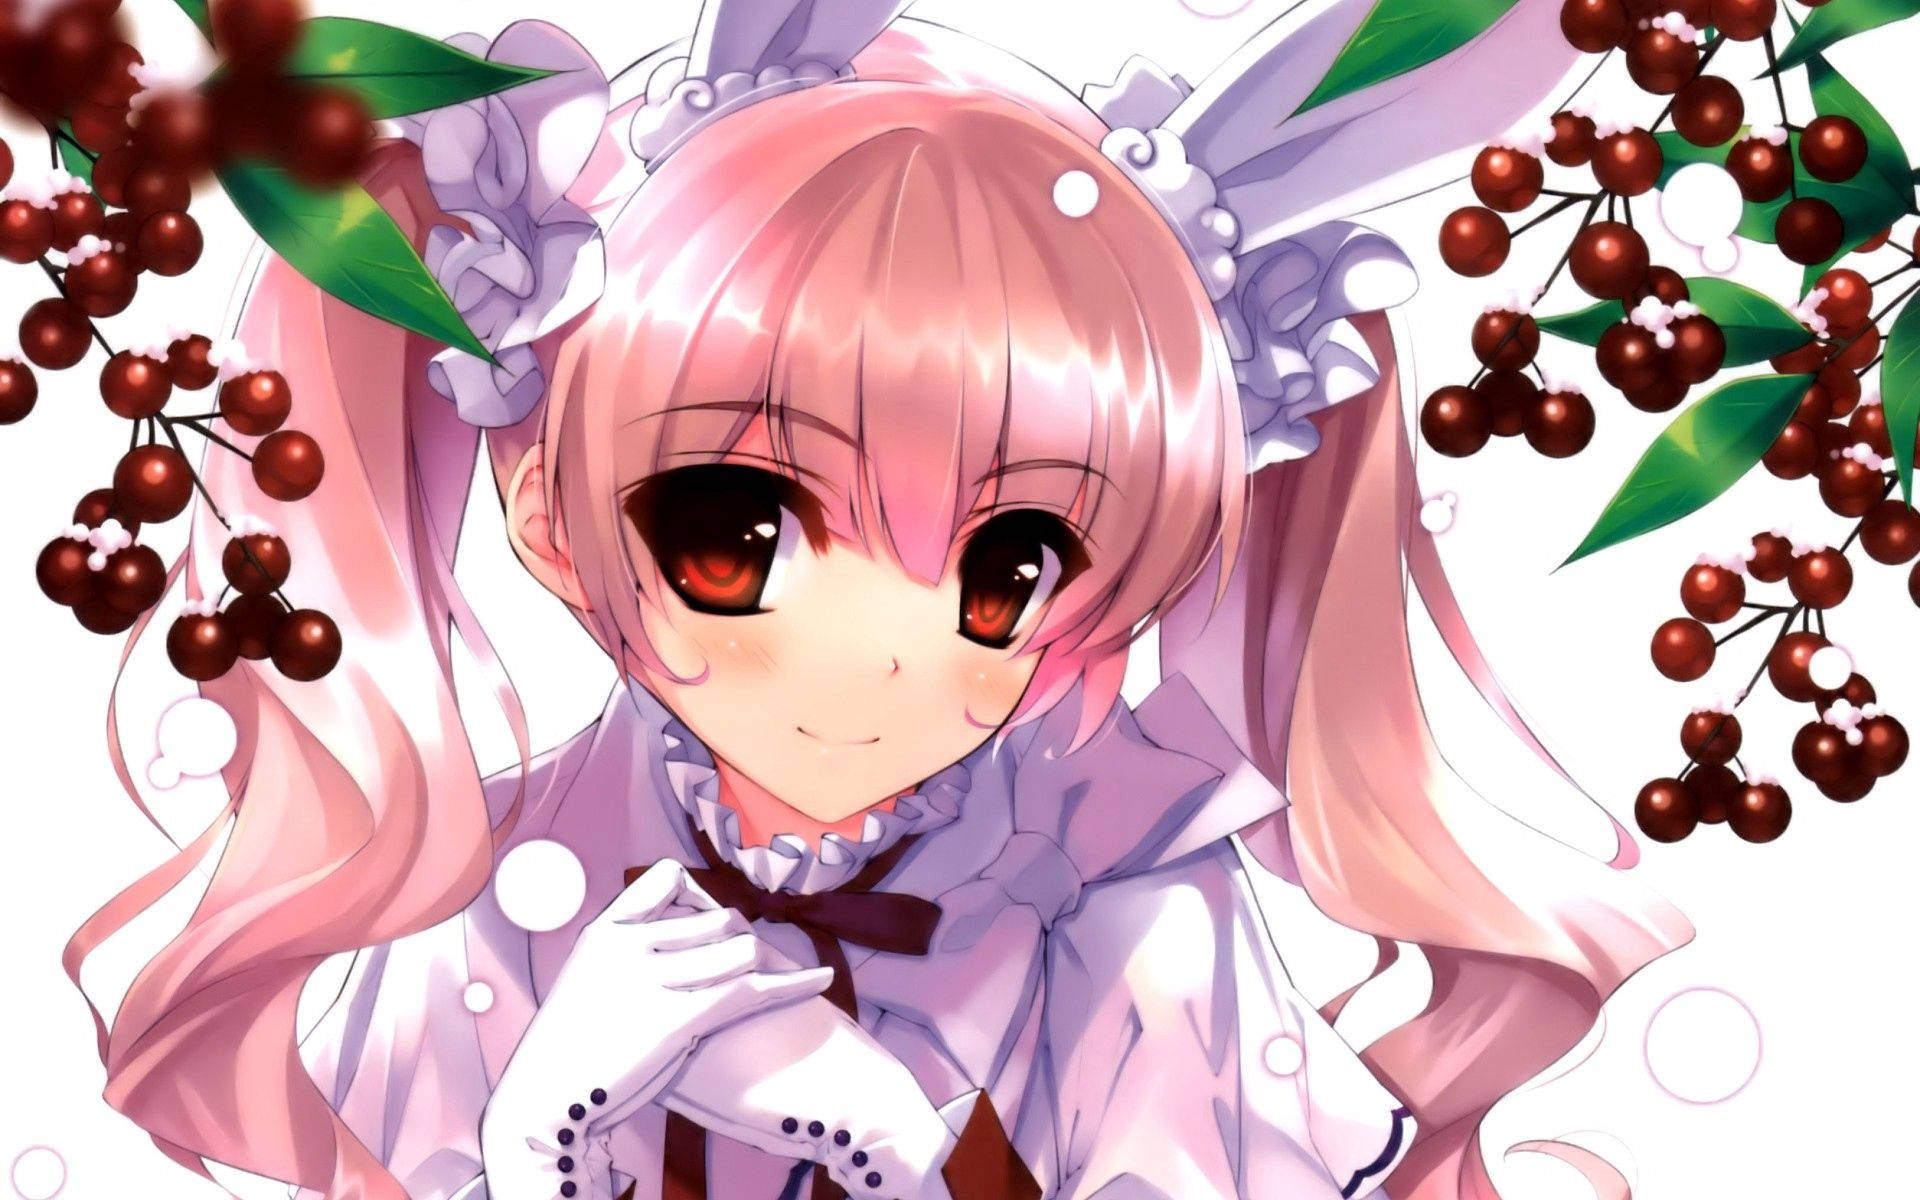 Cute Anime Girl Surrounded By Cherries